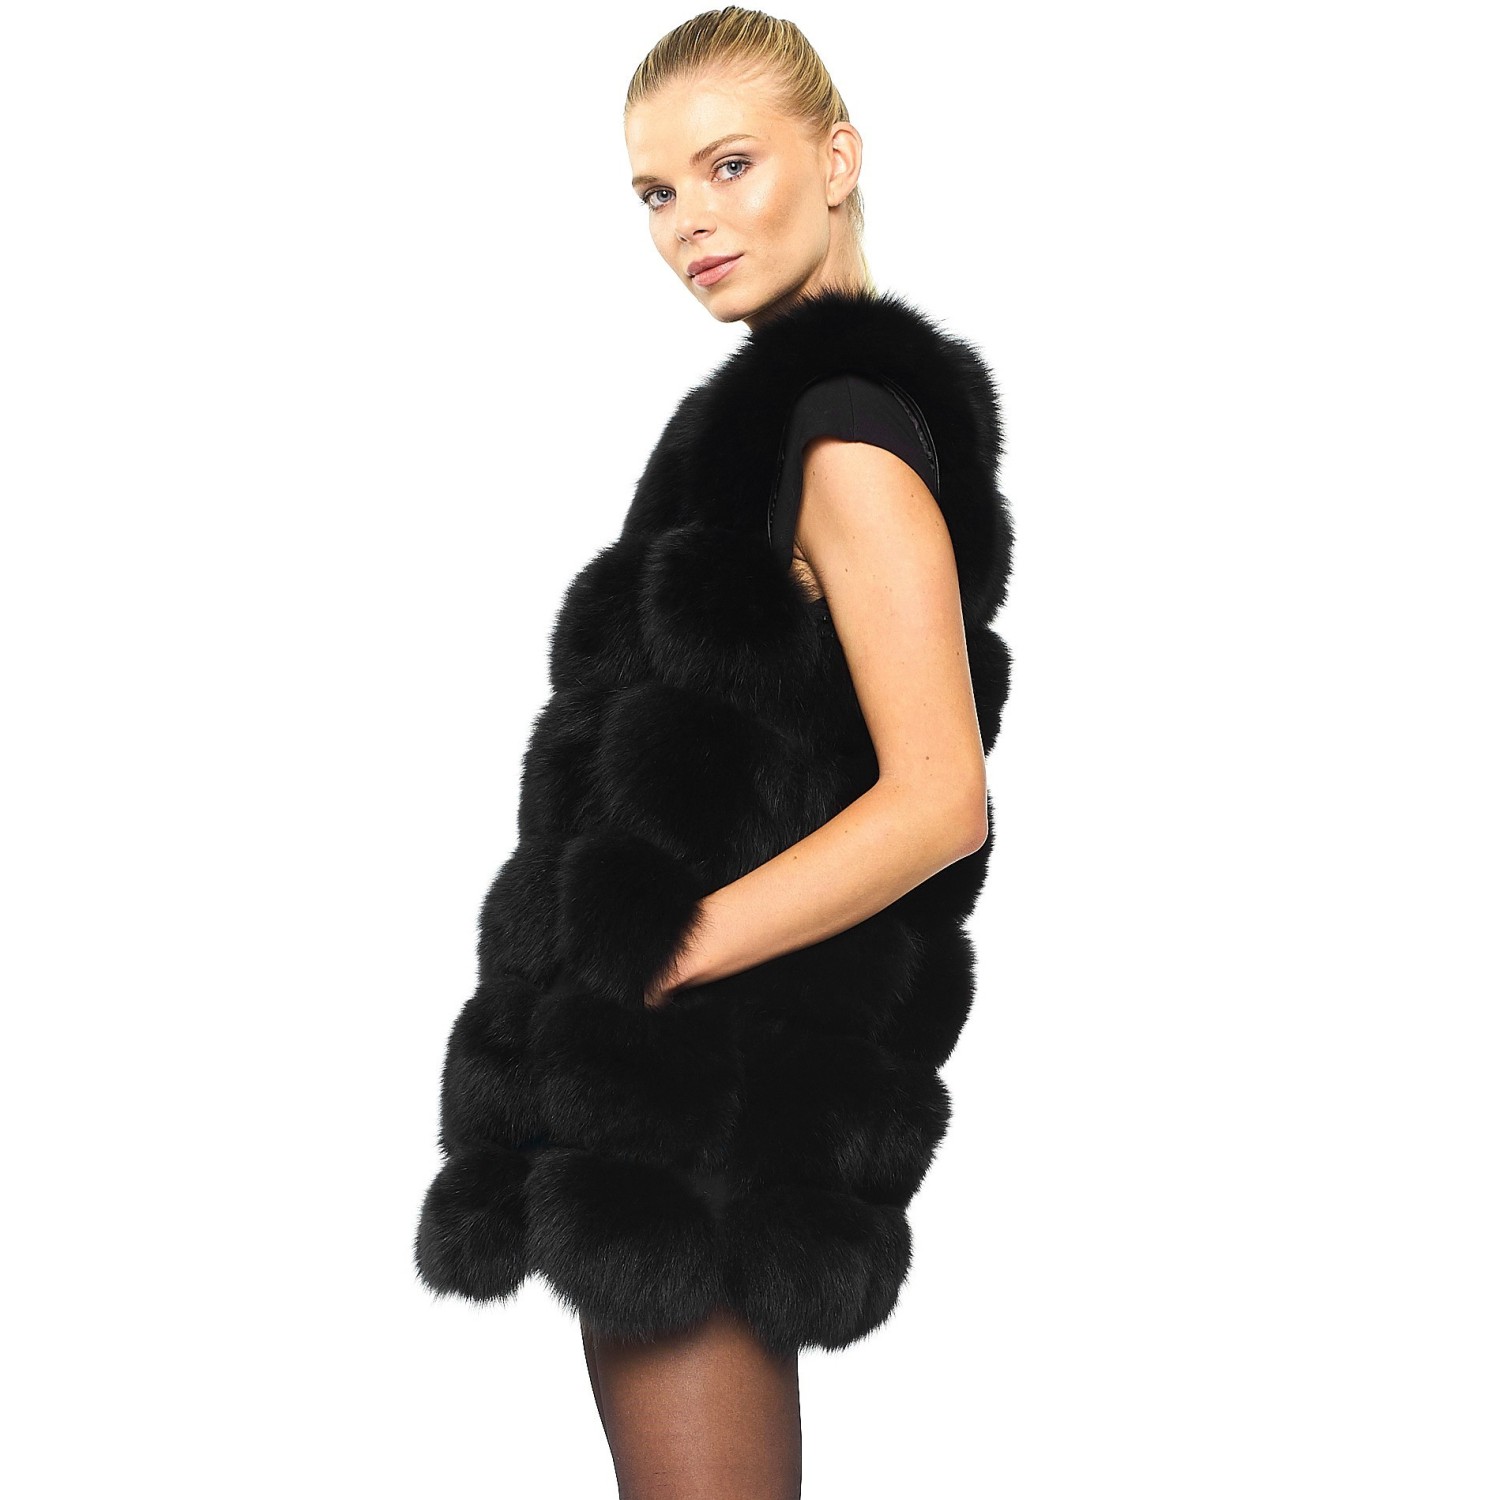 Black Fur Jacket with leather sleeves “Vogue”